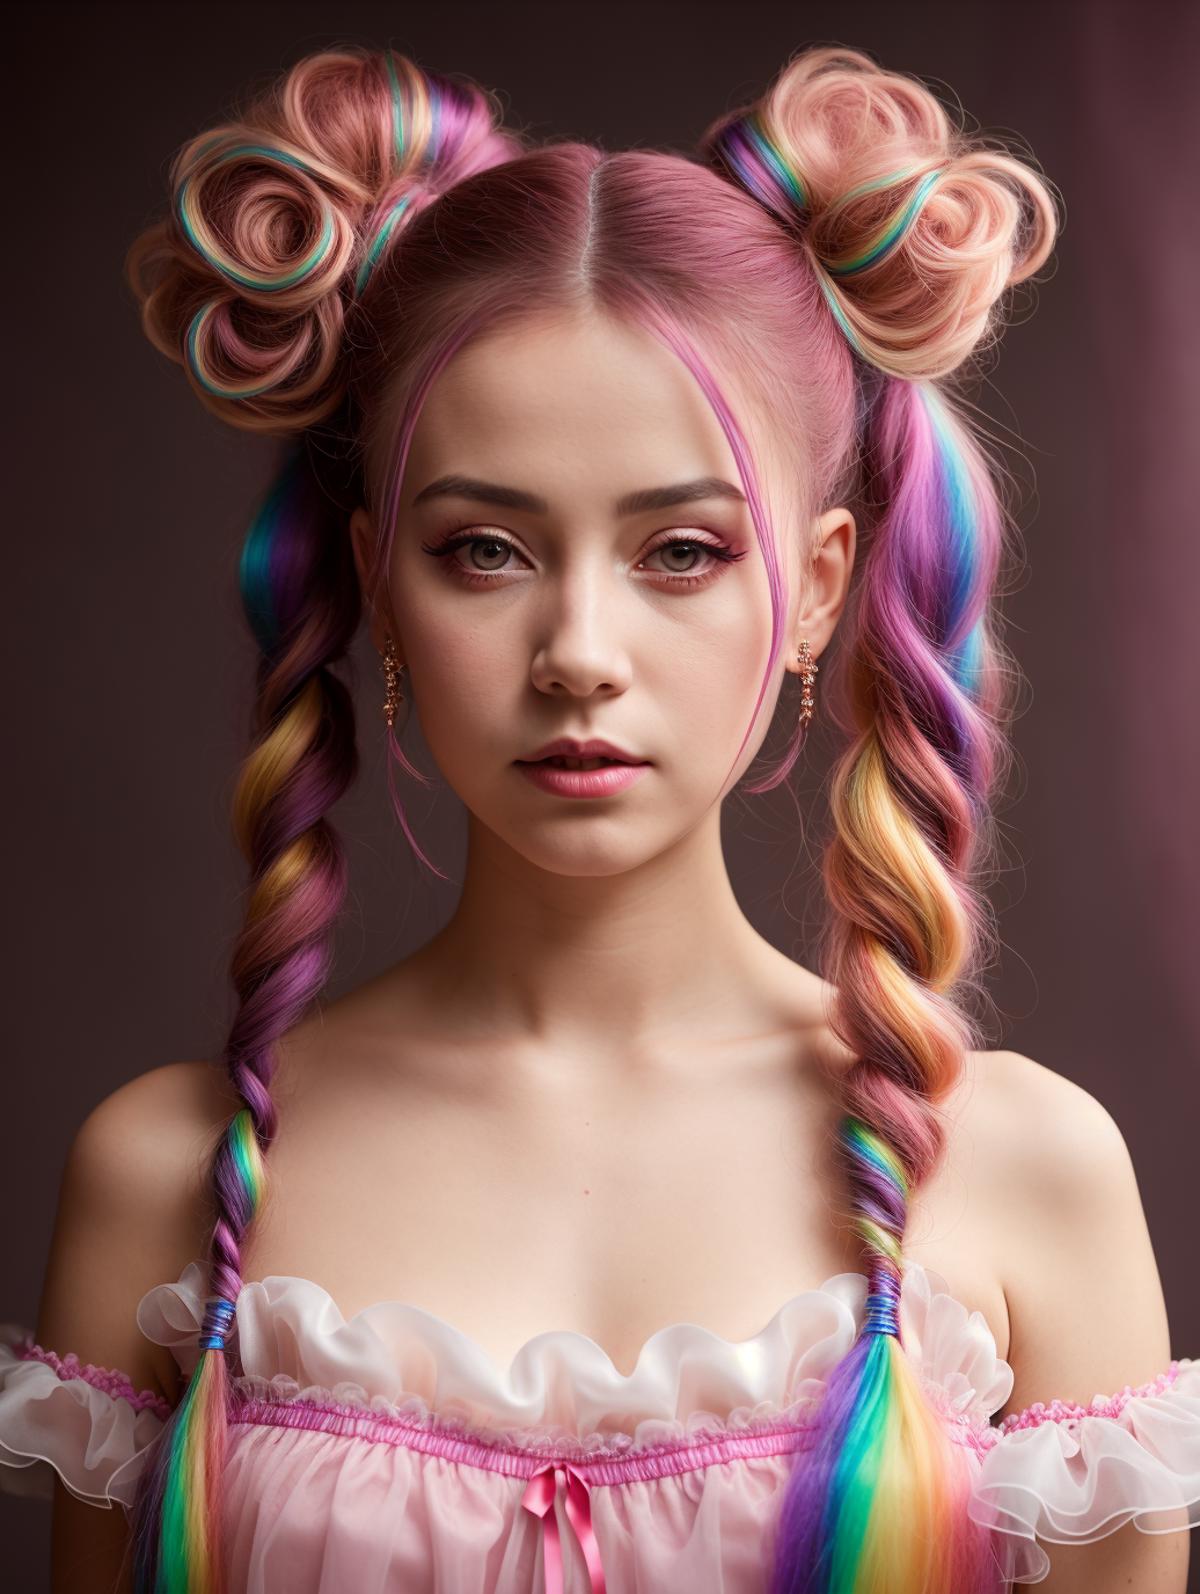 A young woman with colorful hair, wearing a white dress and pink bows, poses for the camera.